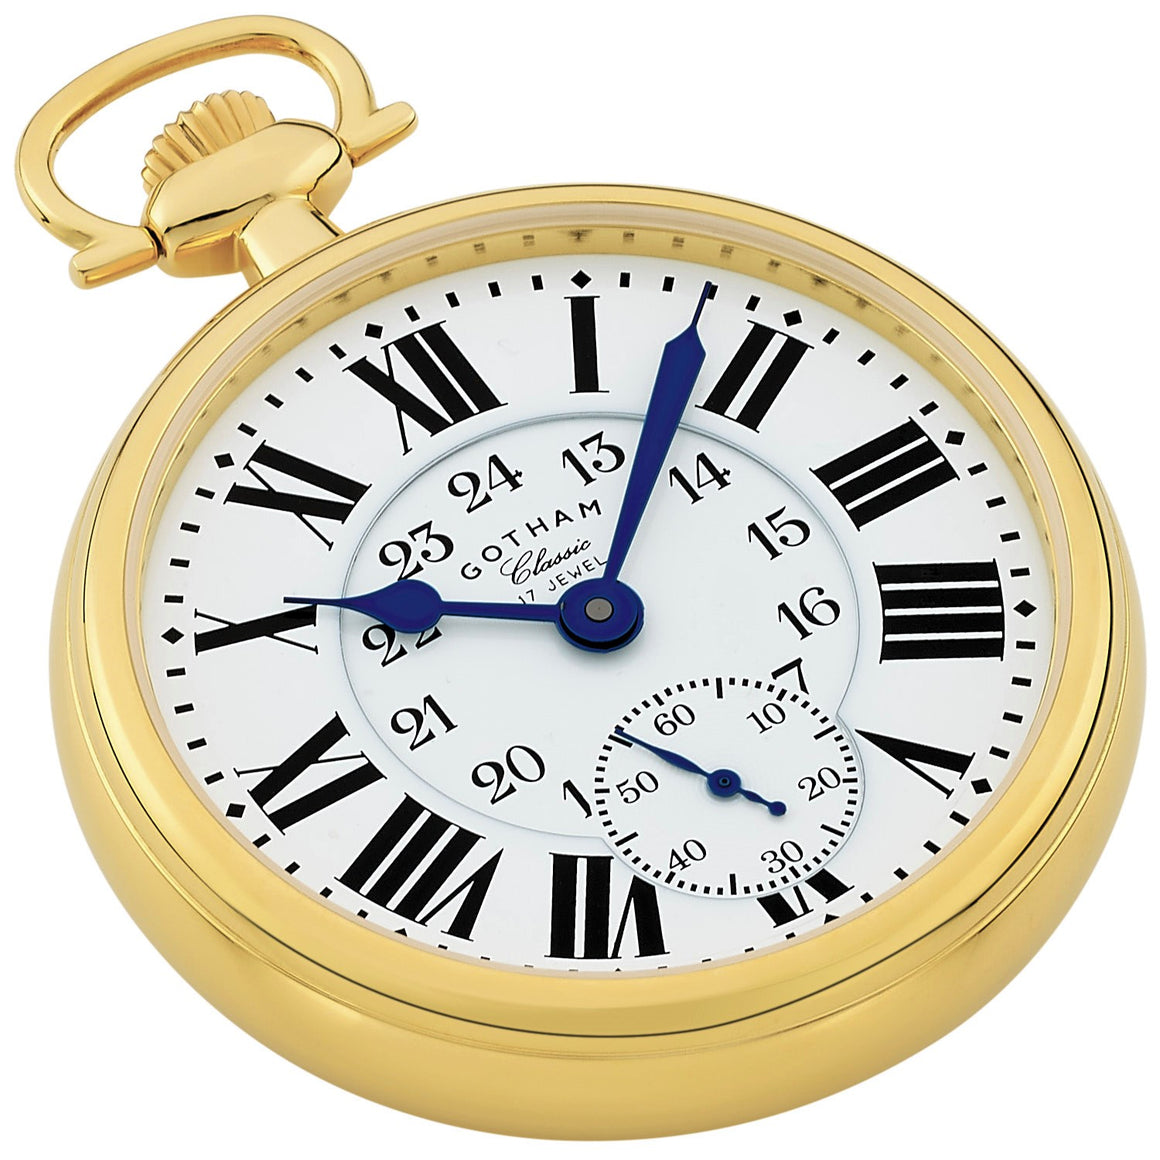 Gotham Classic Series Gold Plated Stainless Steel Open Face 17 Jewel Mechanical Hand Wind Pocket Watch # GWC14112G